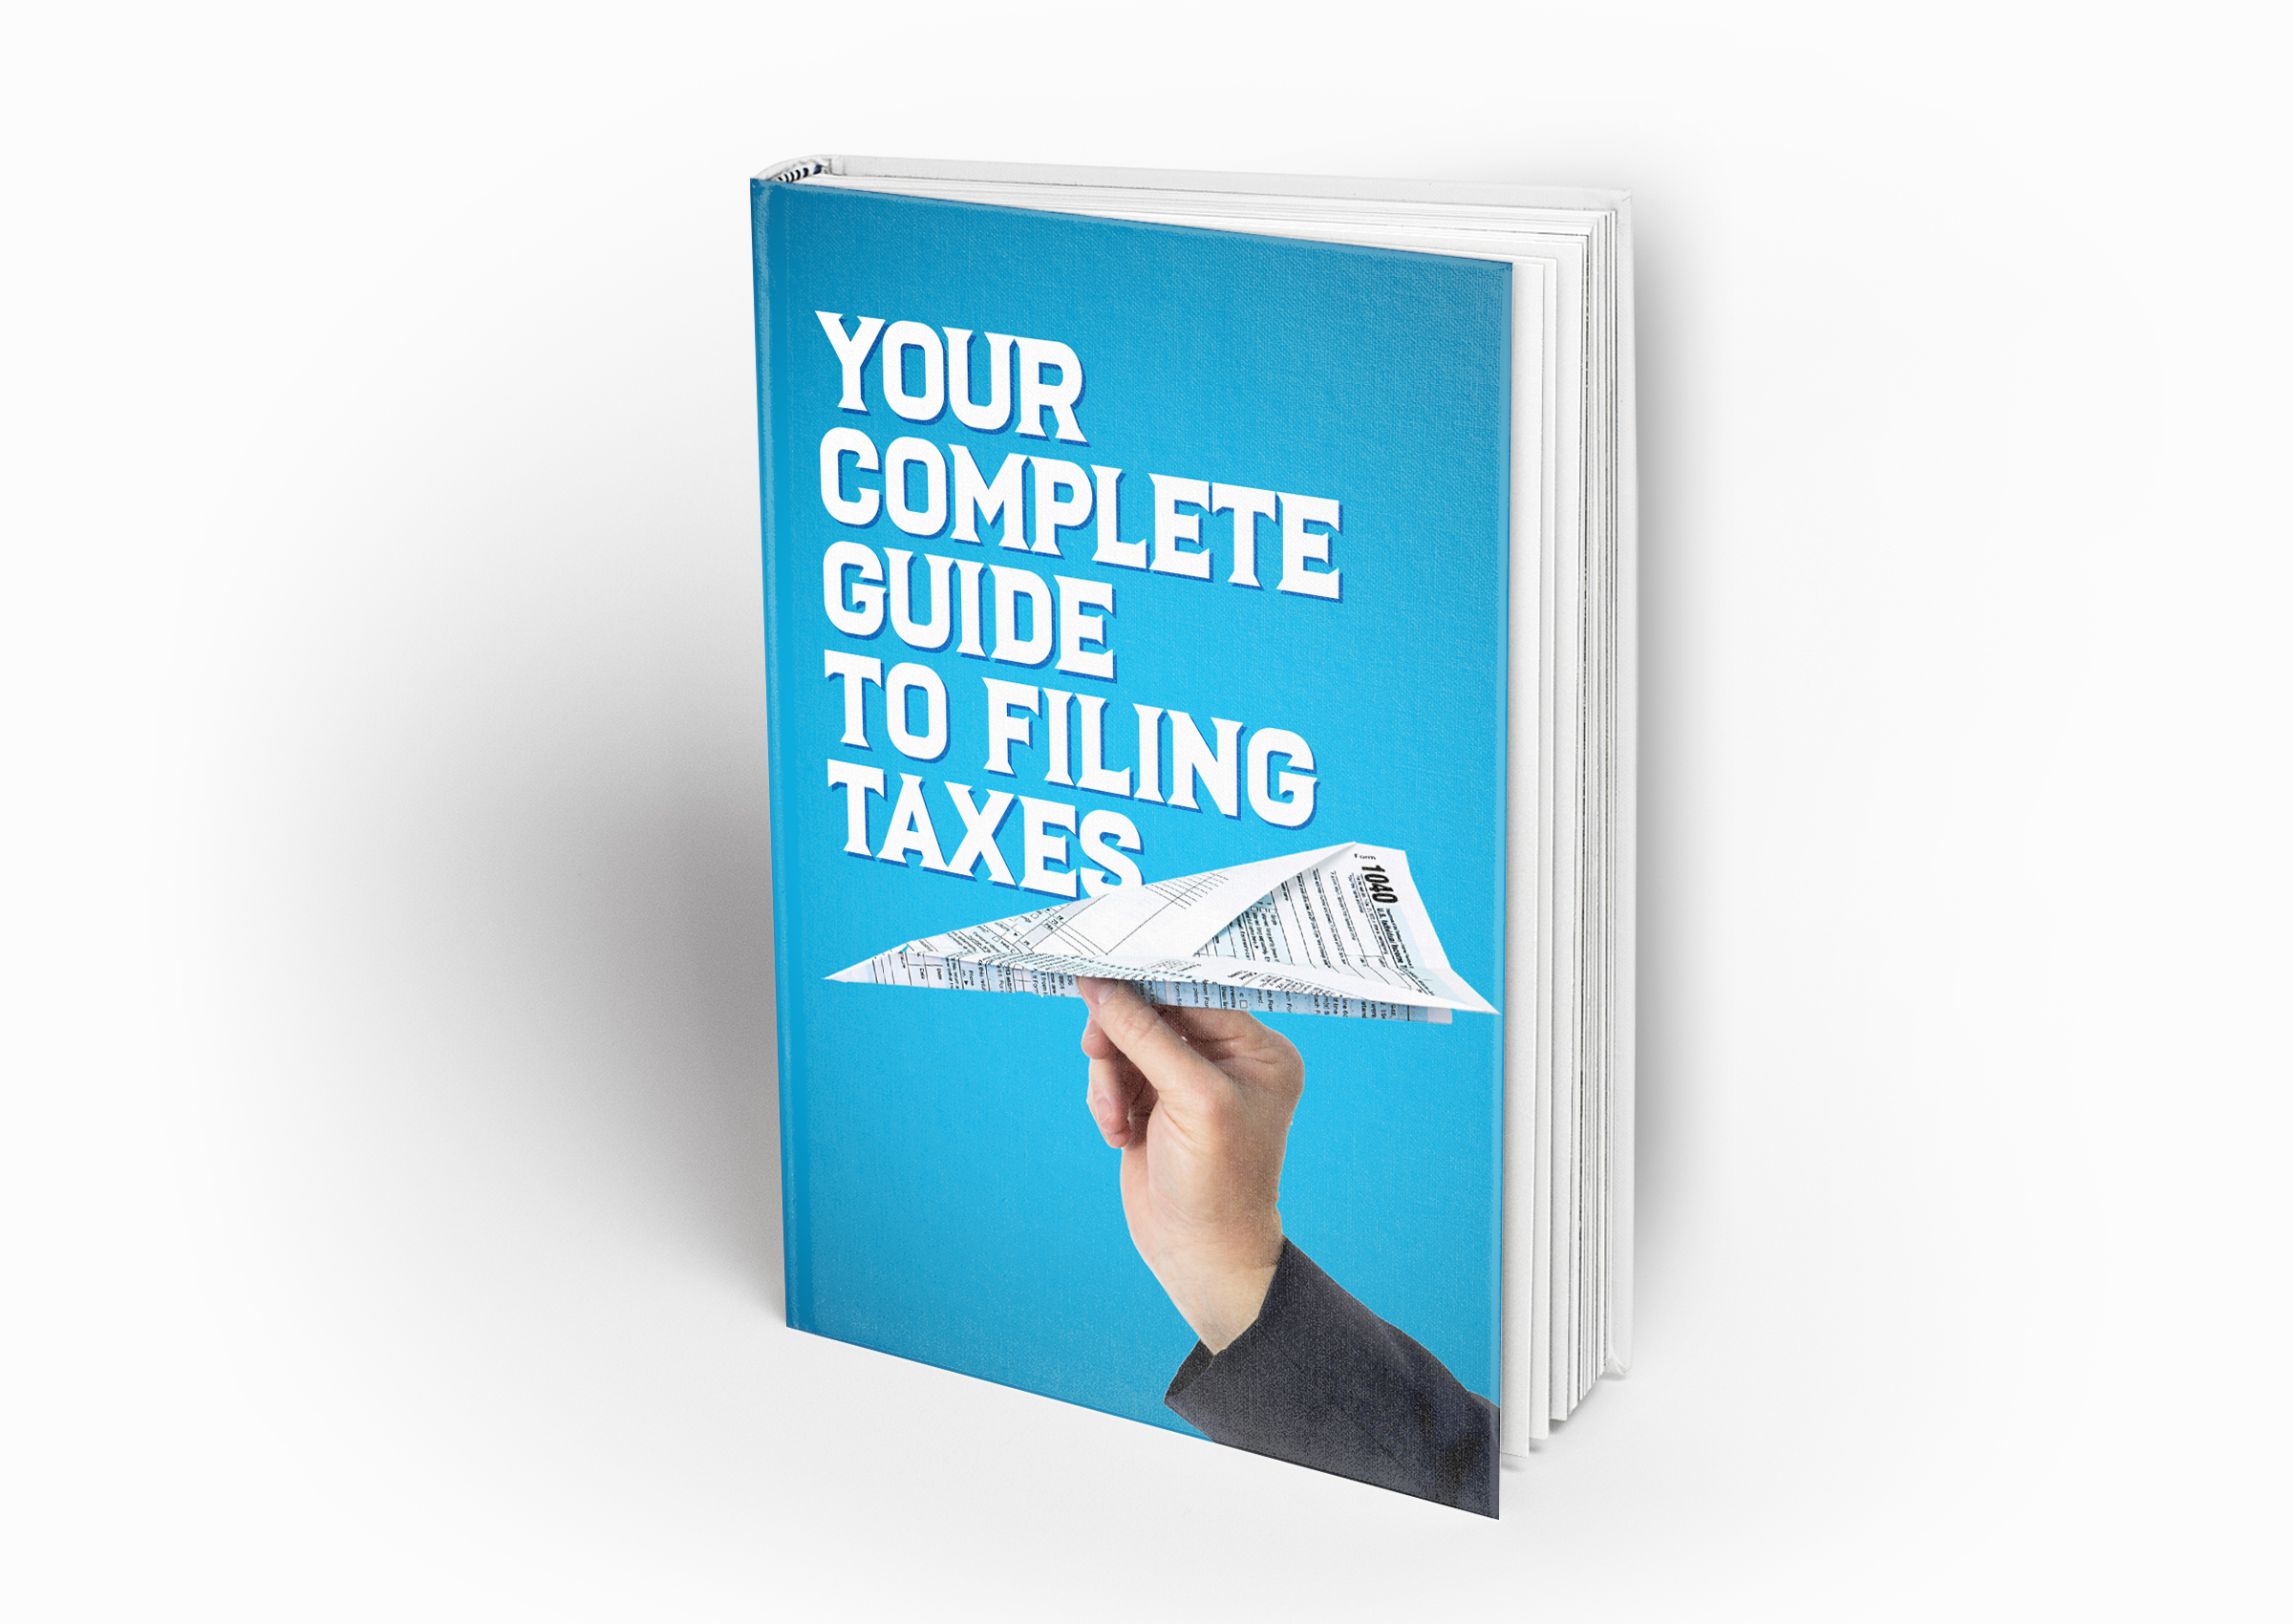 e-book of Your Complete Guide to Filing Taxes